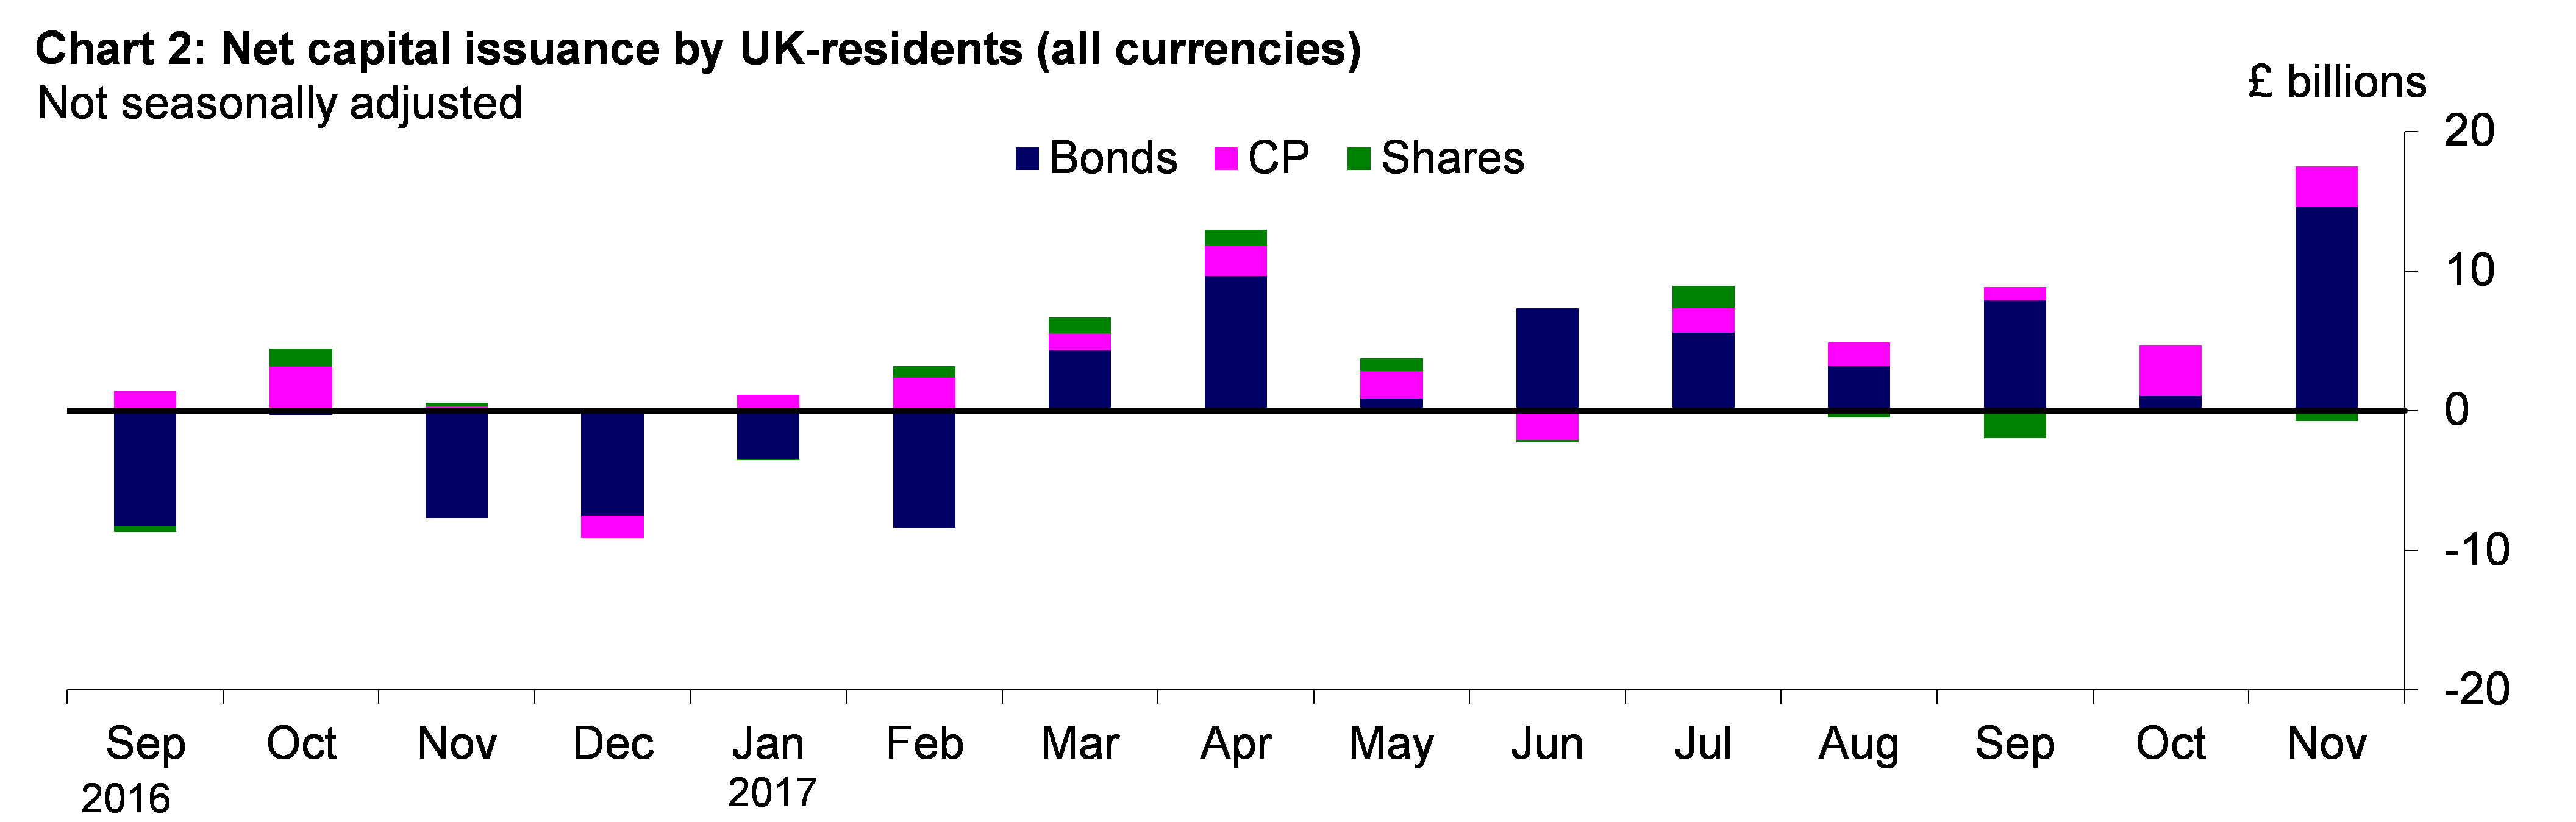 Chart 2: Net capital issuance by UK-residents (all currencies)